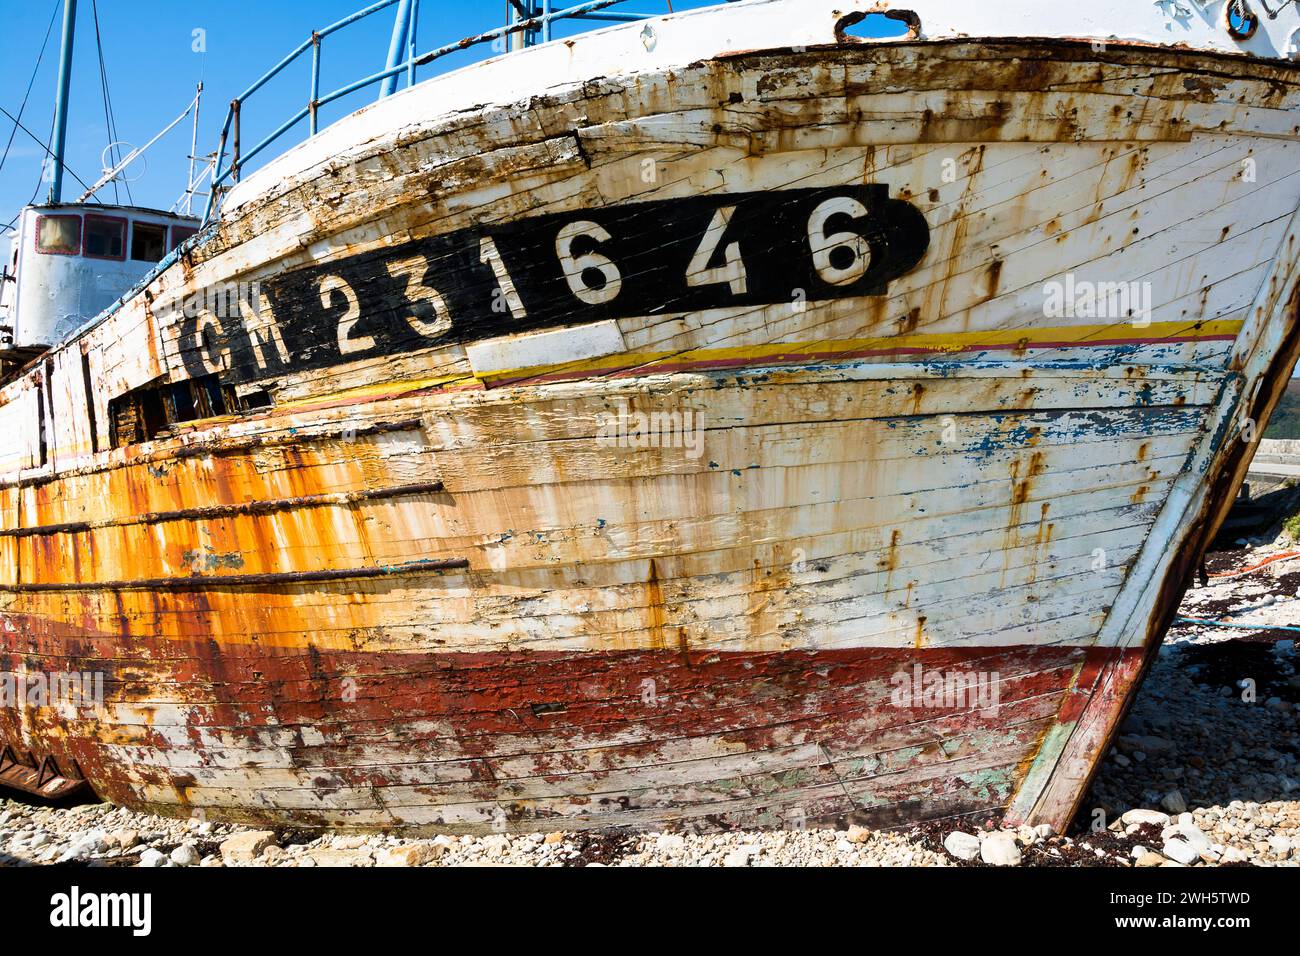 A Shipwreck in Camaret-Sur-Mer on the French Atlantic coast. Stock Photo